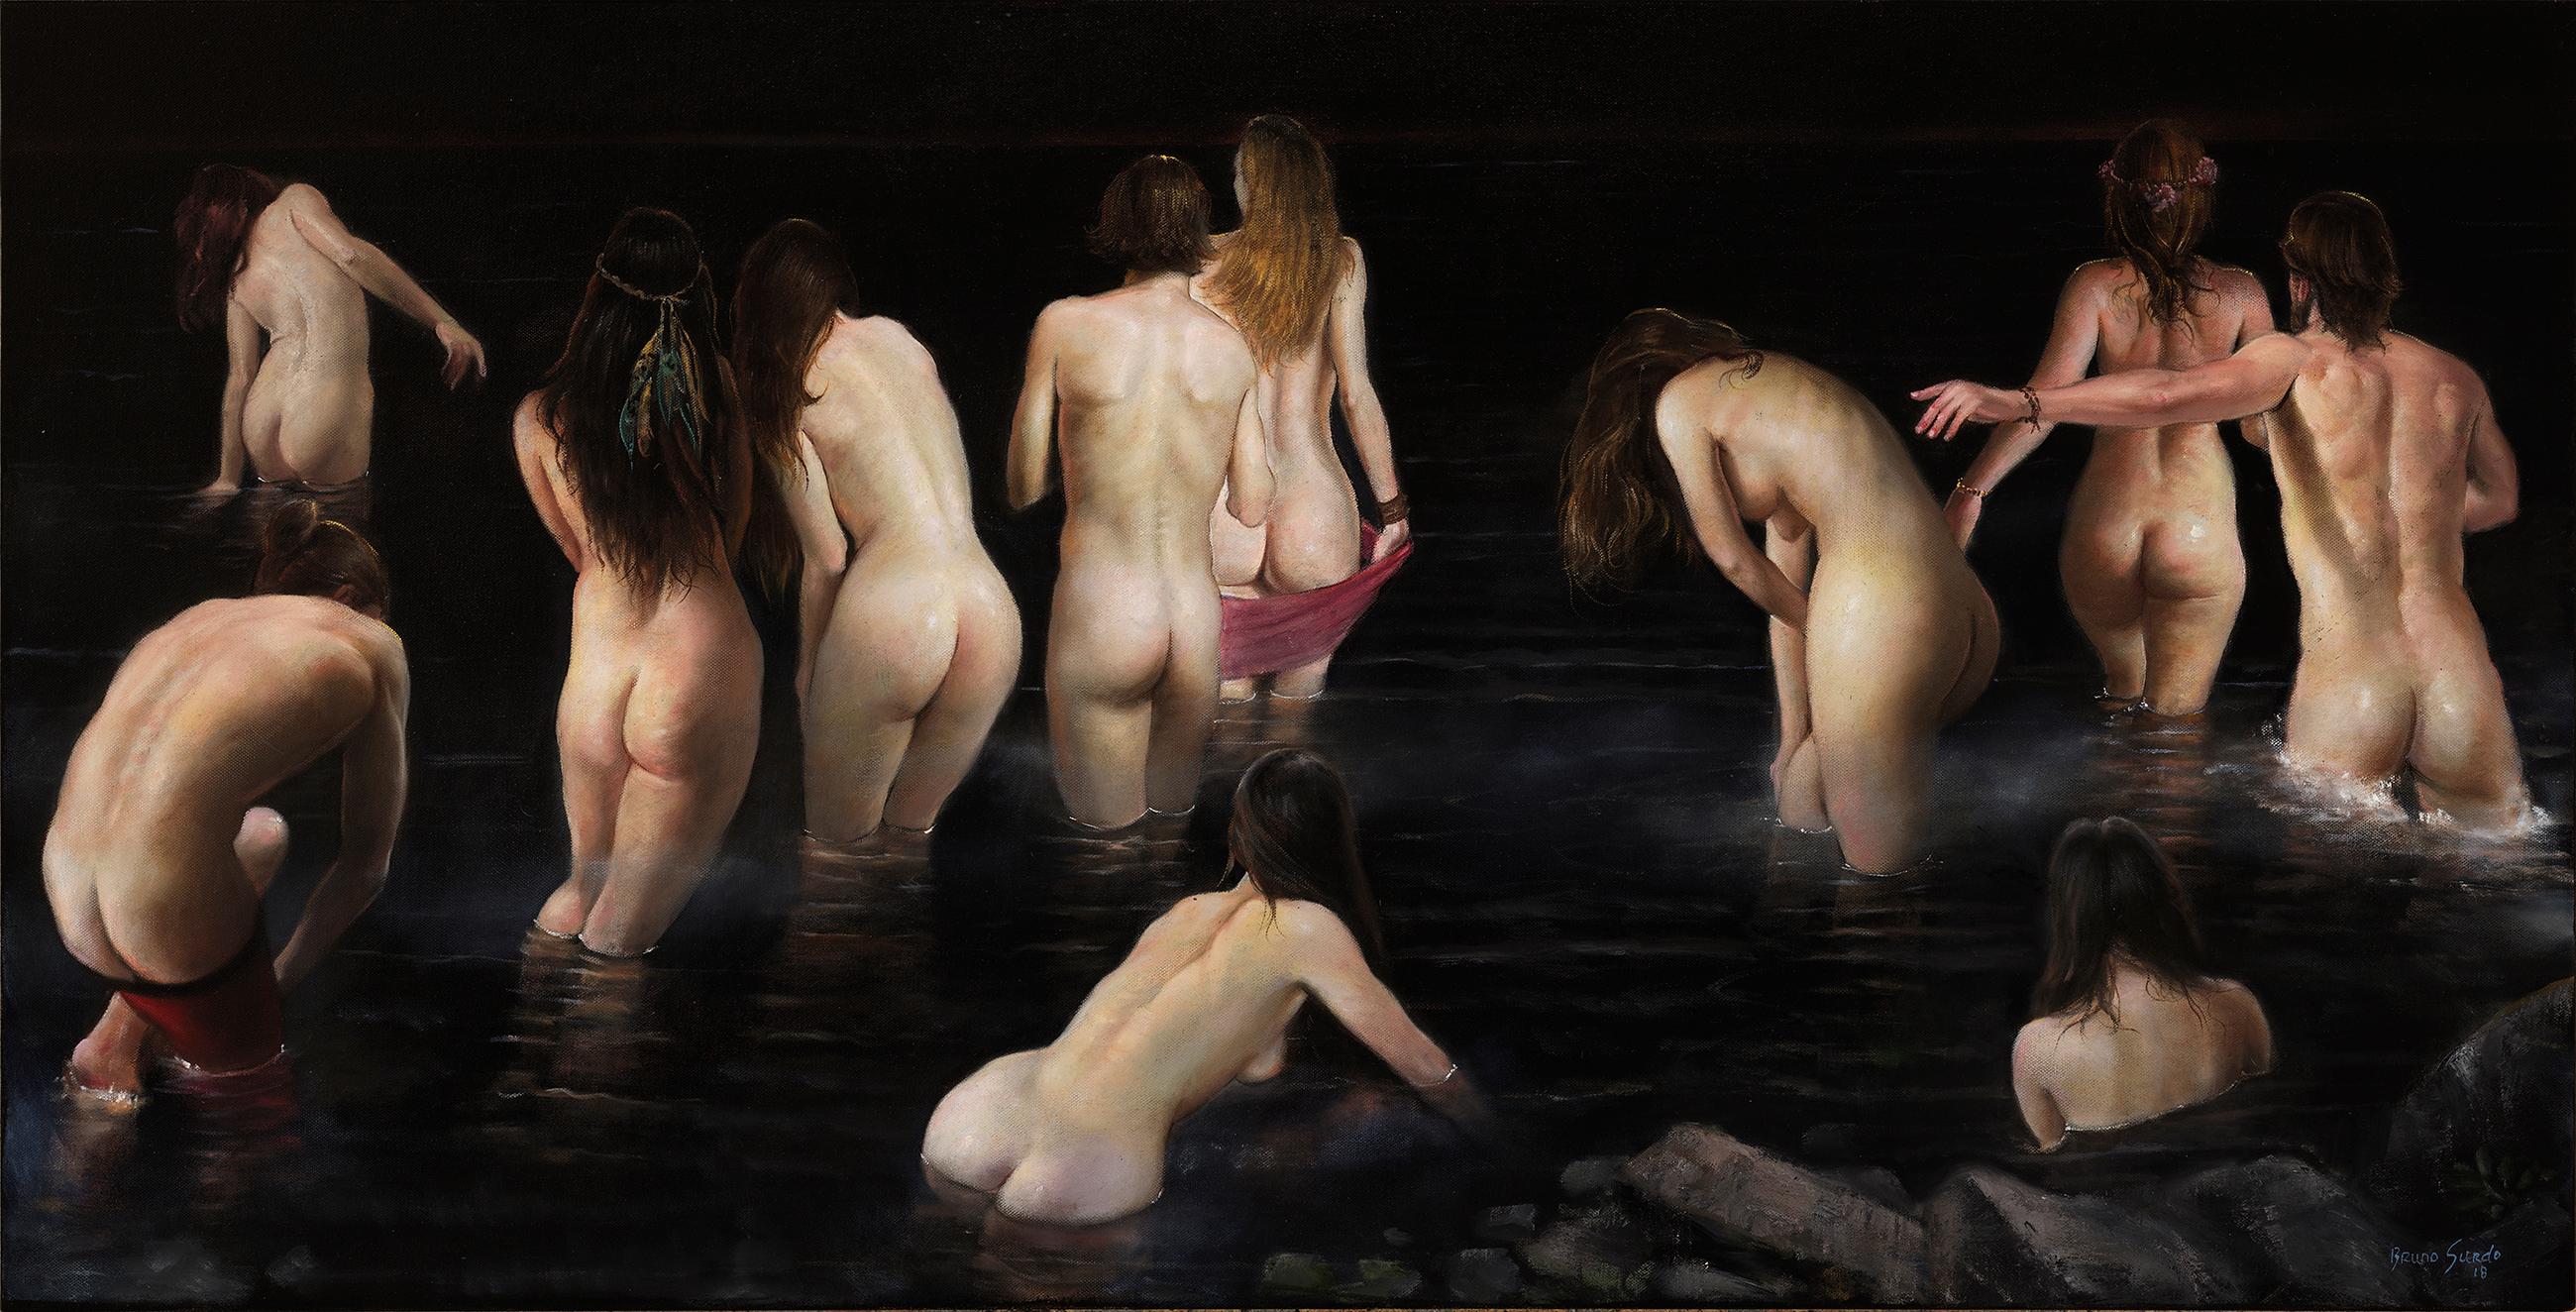 The Abyss - Original Oil Painting of Nude Figures Wandering Into a Body of Water